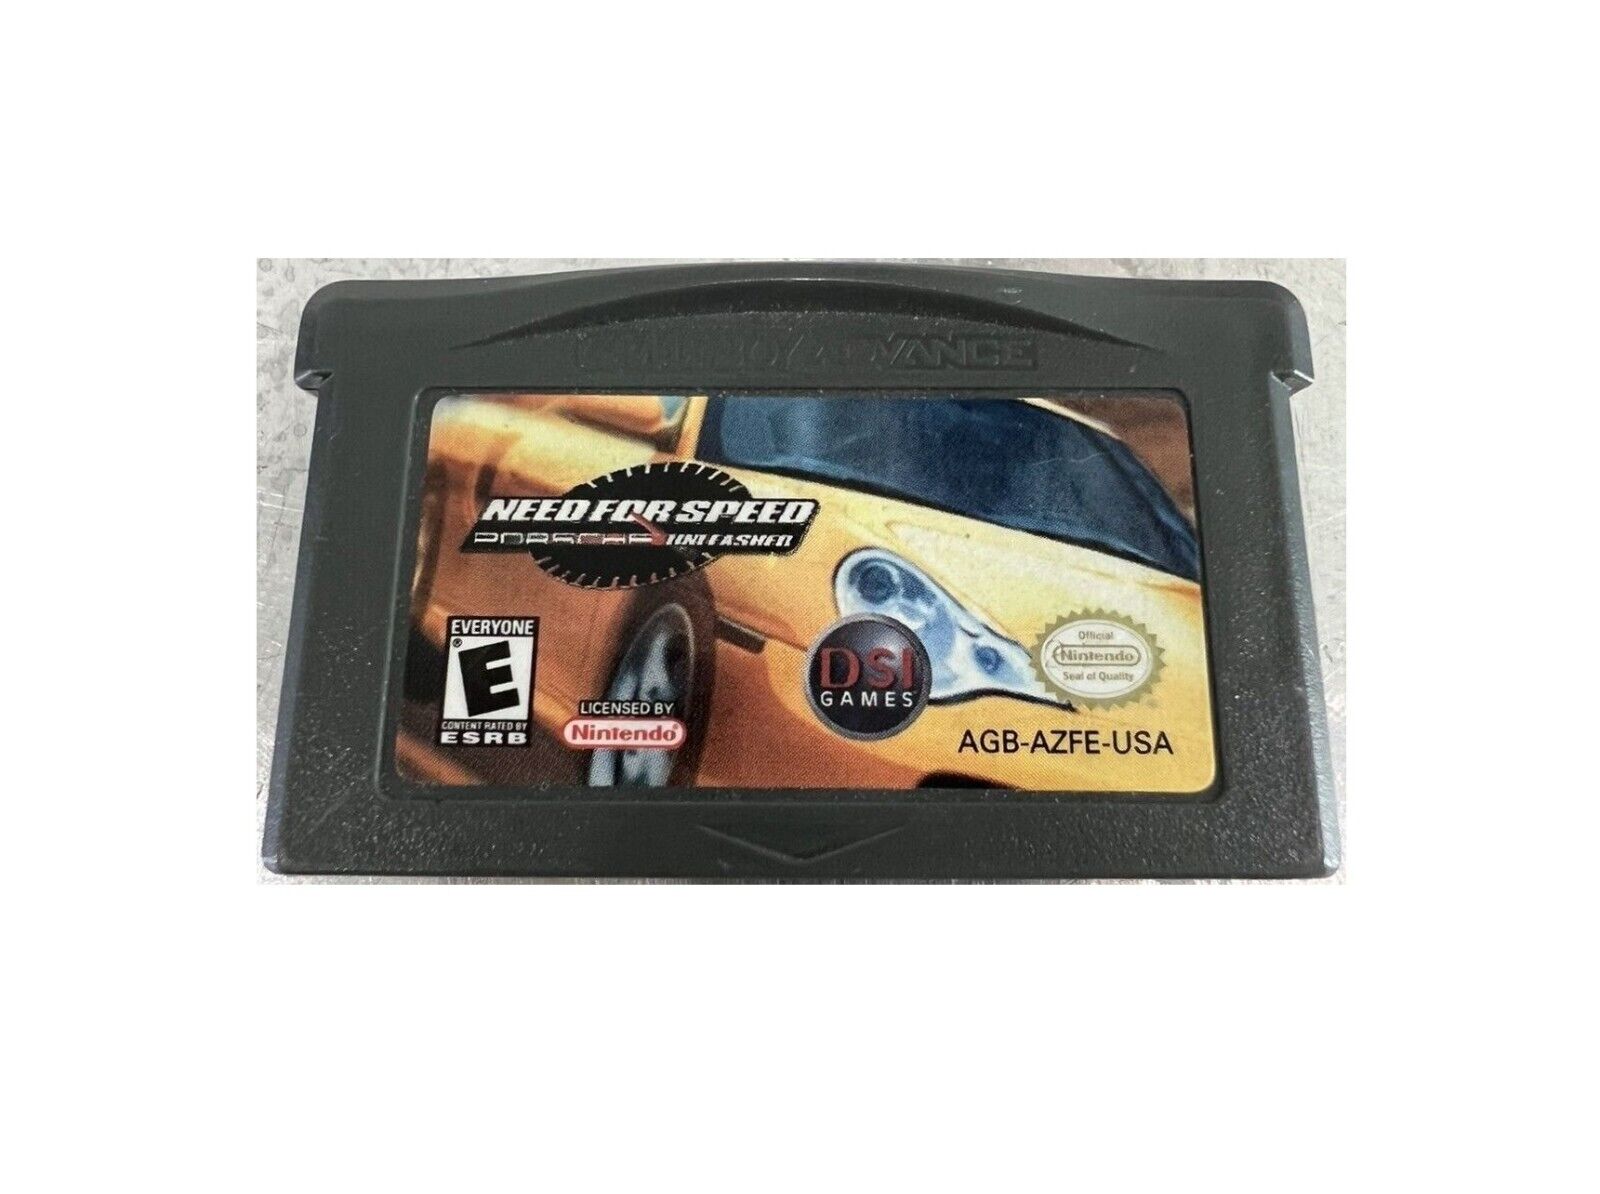 Need for Speed Porsche Unleashed -Nintendo Game Boy Advance AGB-AZFE-USA AGB-002